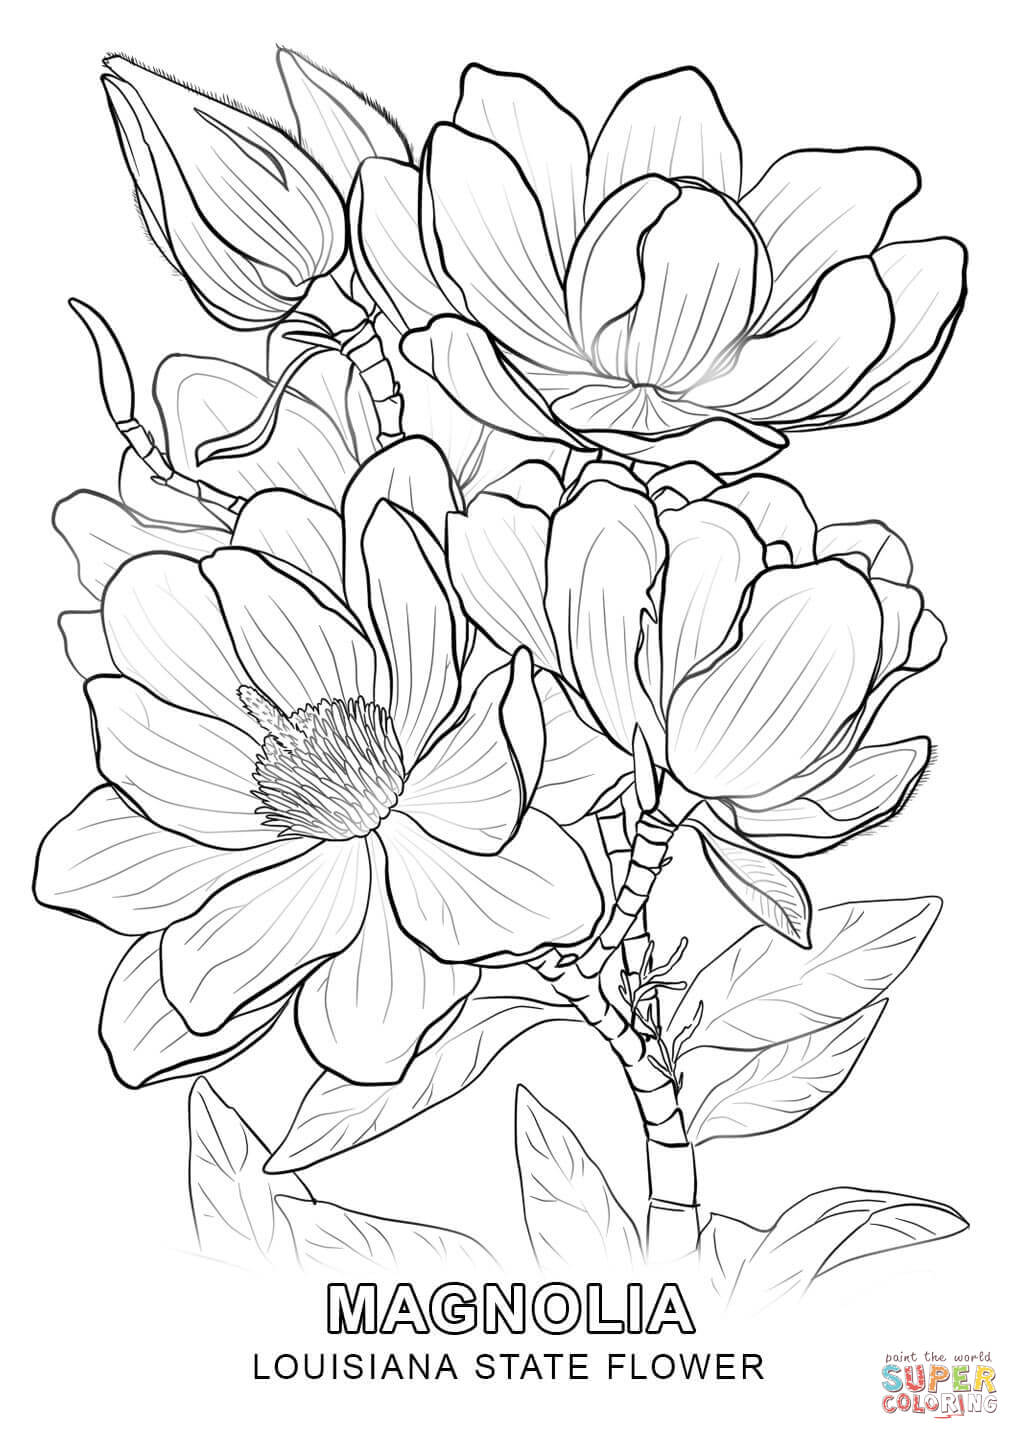 Louisiana State Flower coloring page | Free Printable Coloring Pages